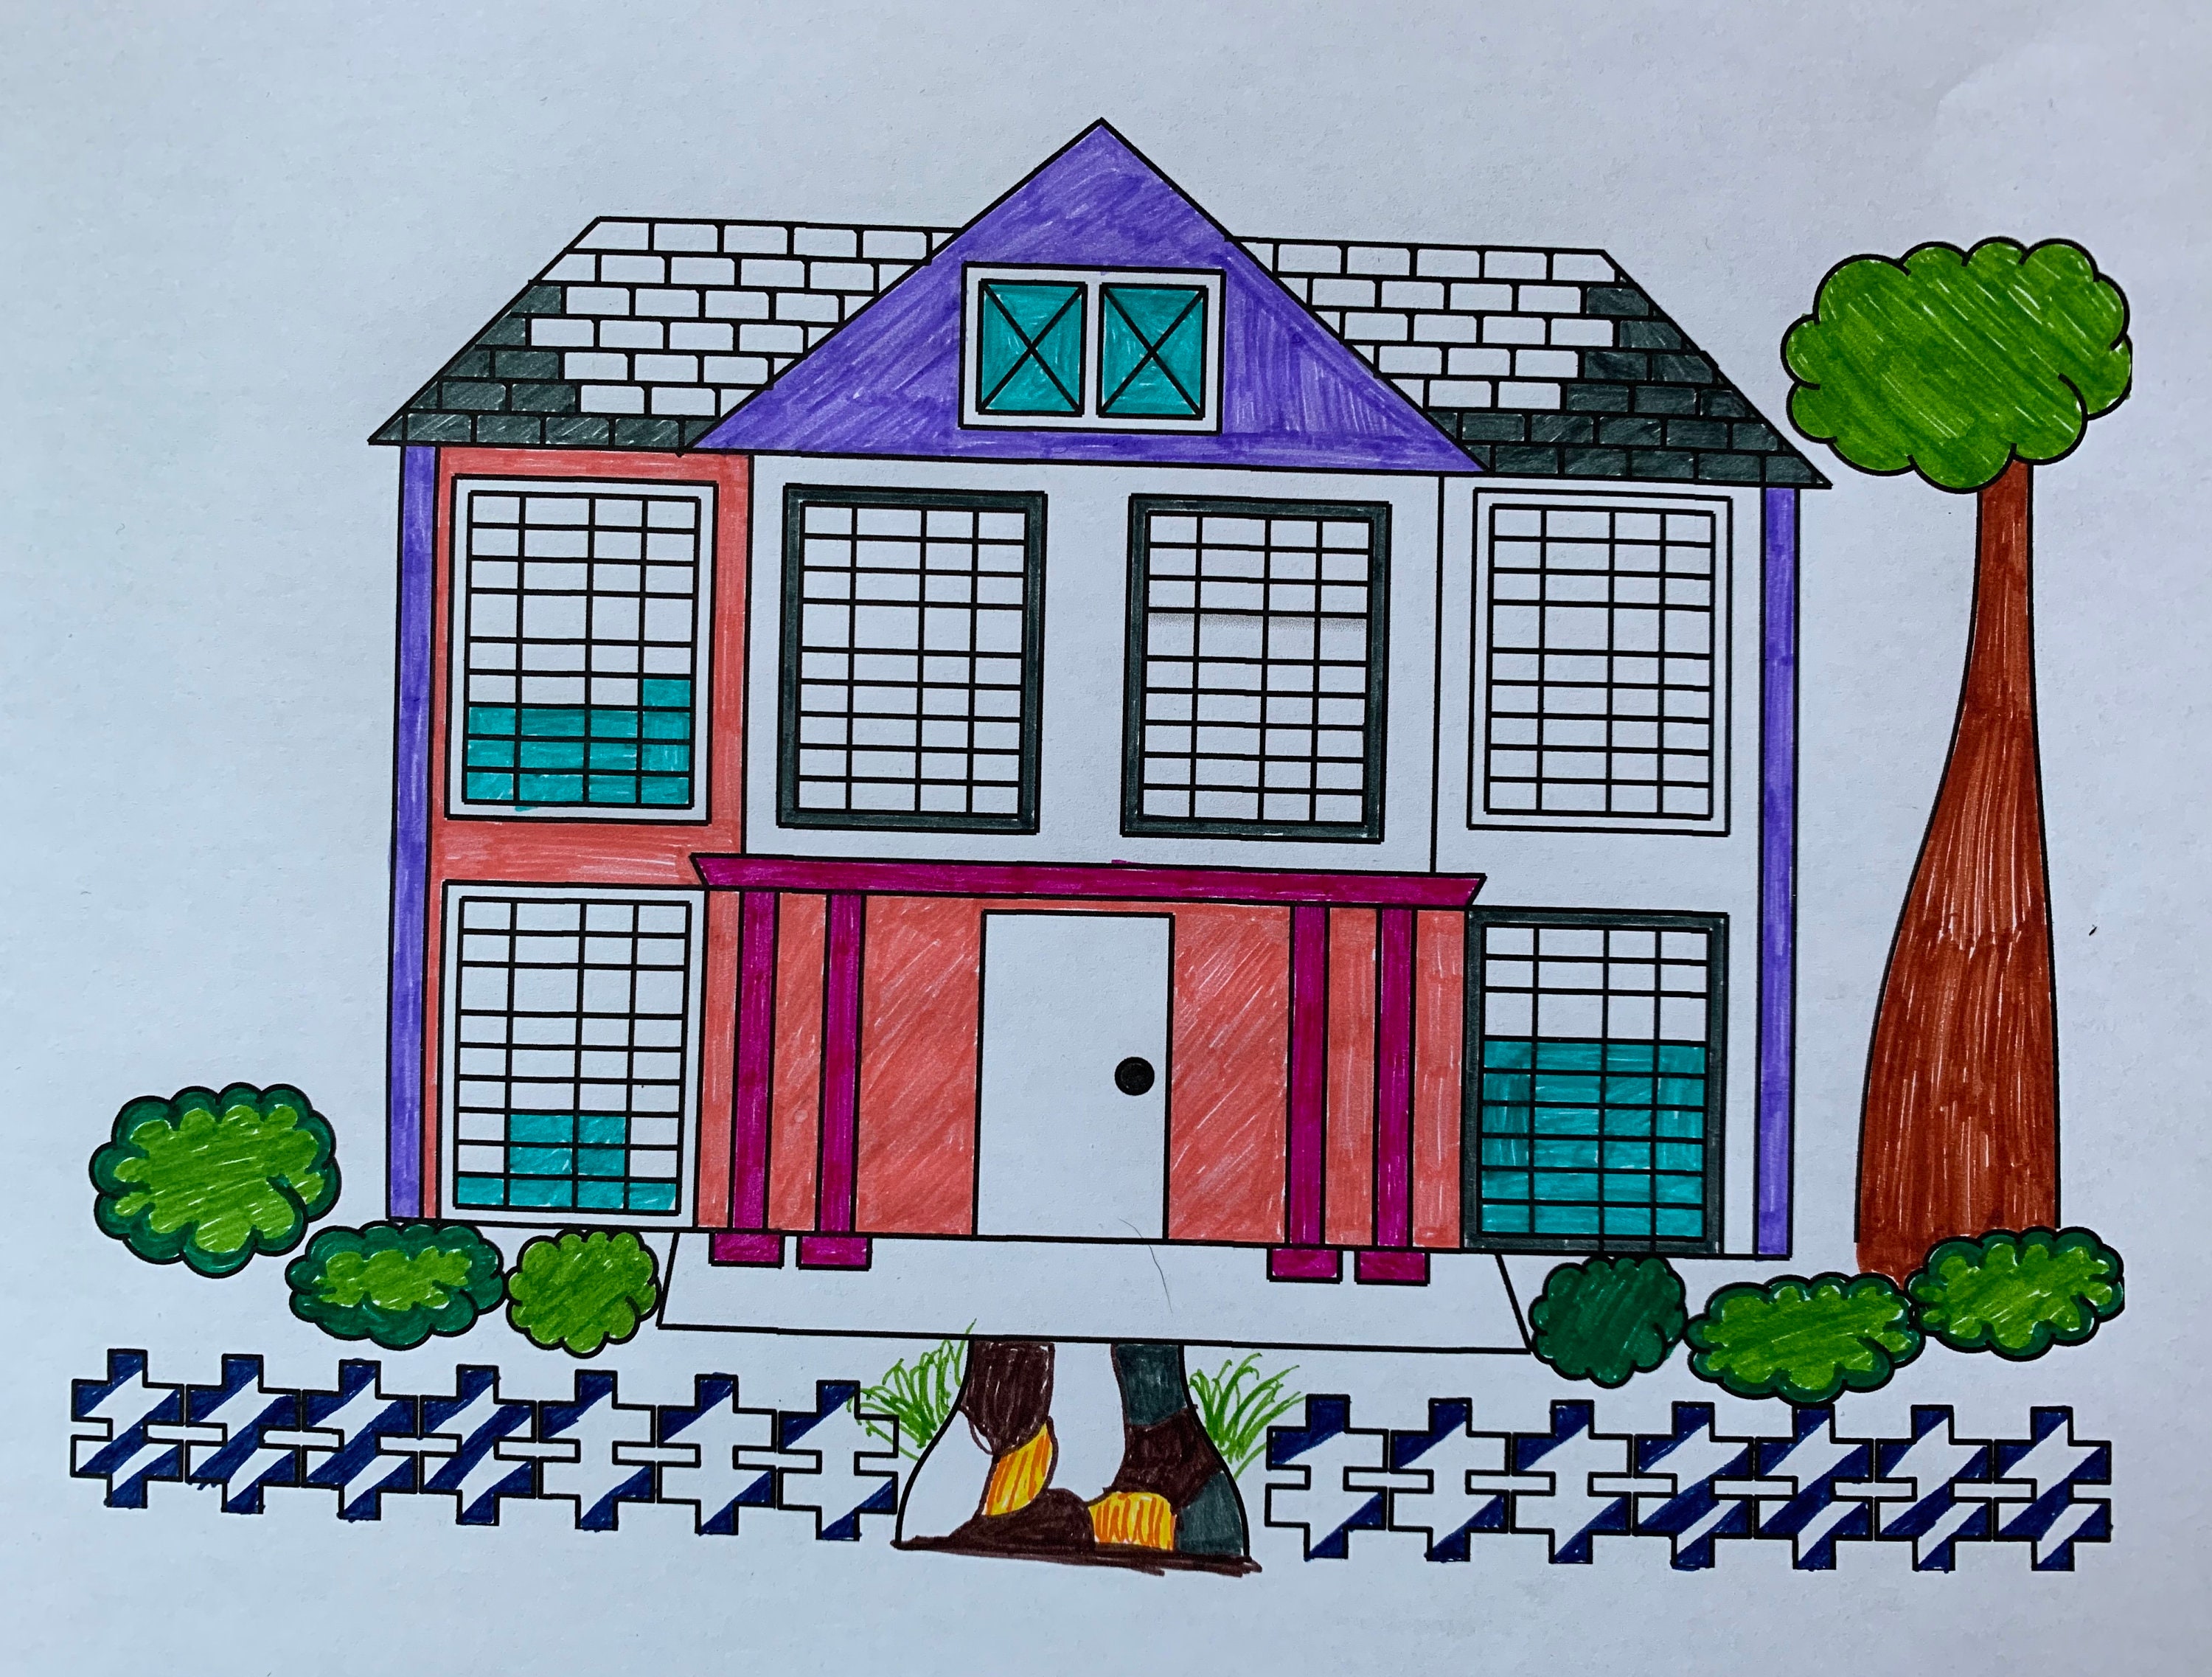 Mortgage Payment Coloring Page Tracker 30 Year | Etsy